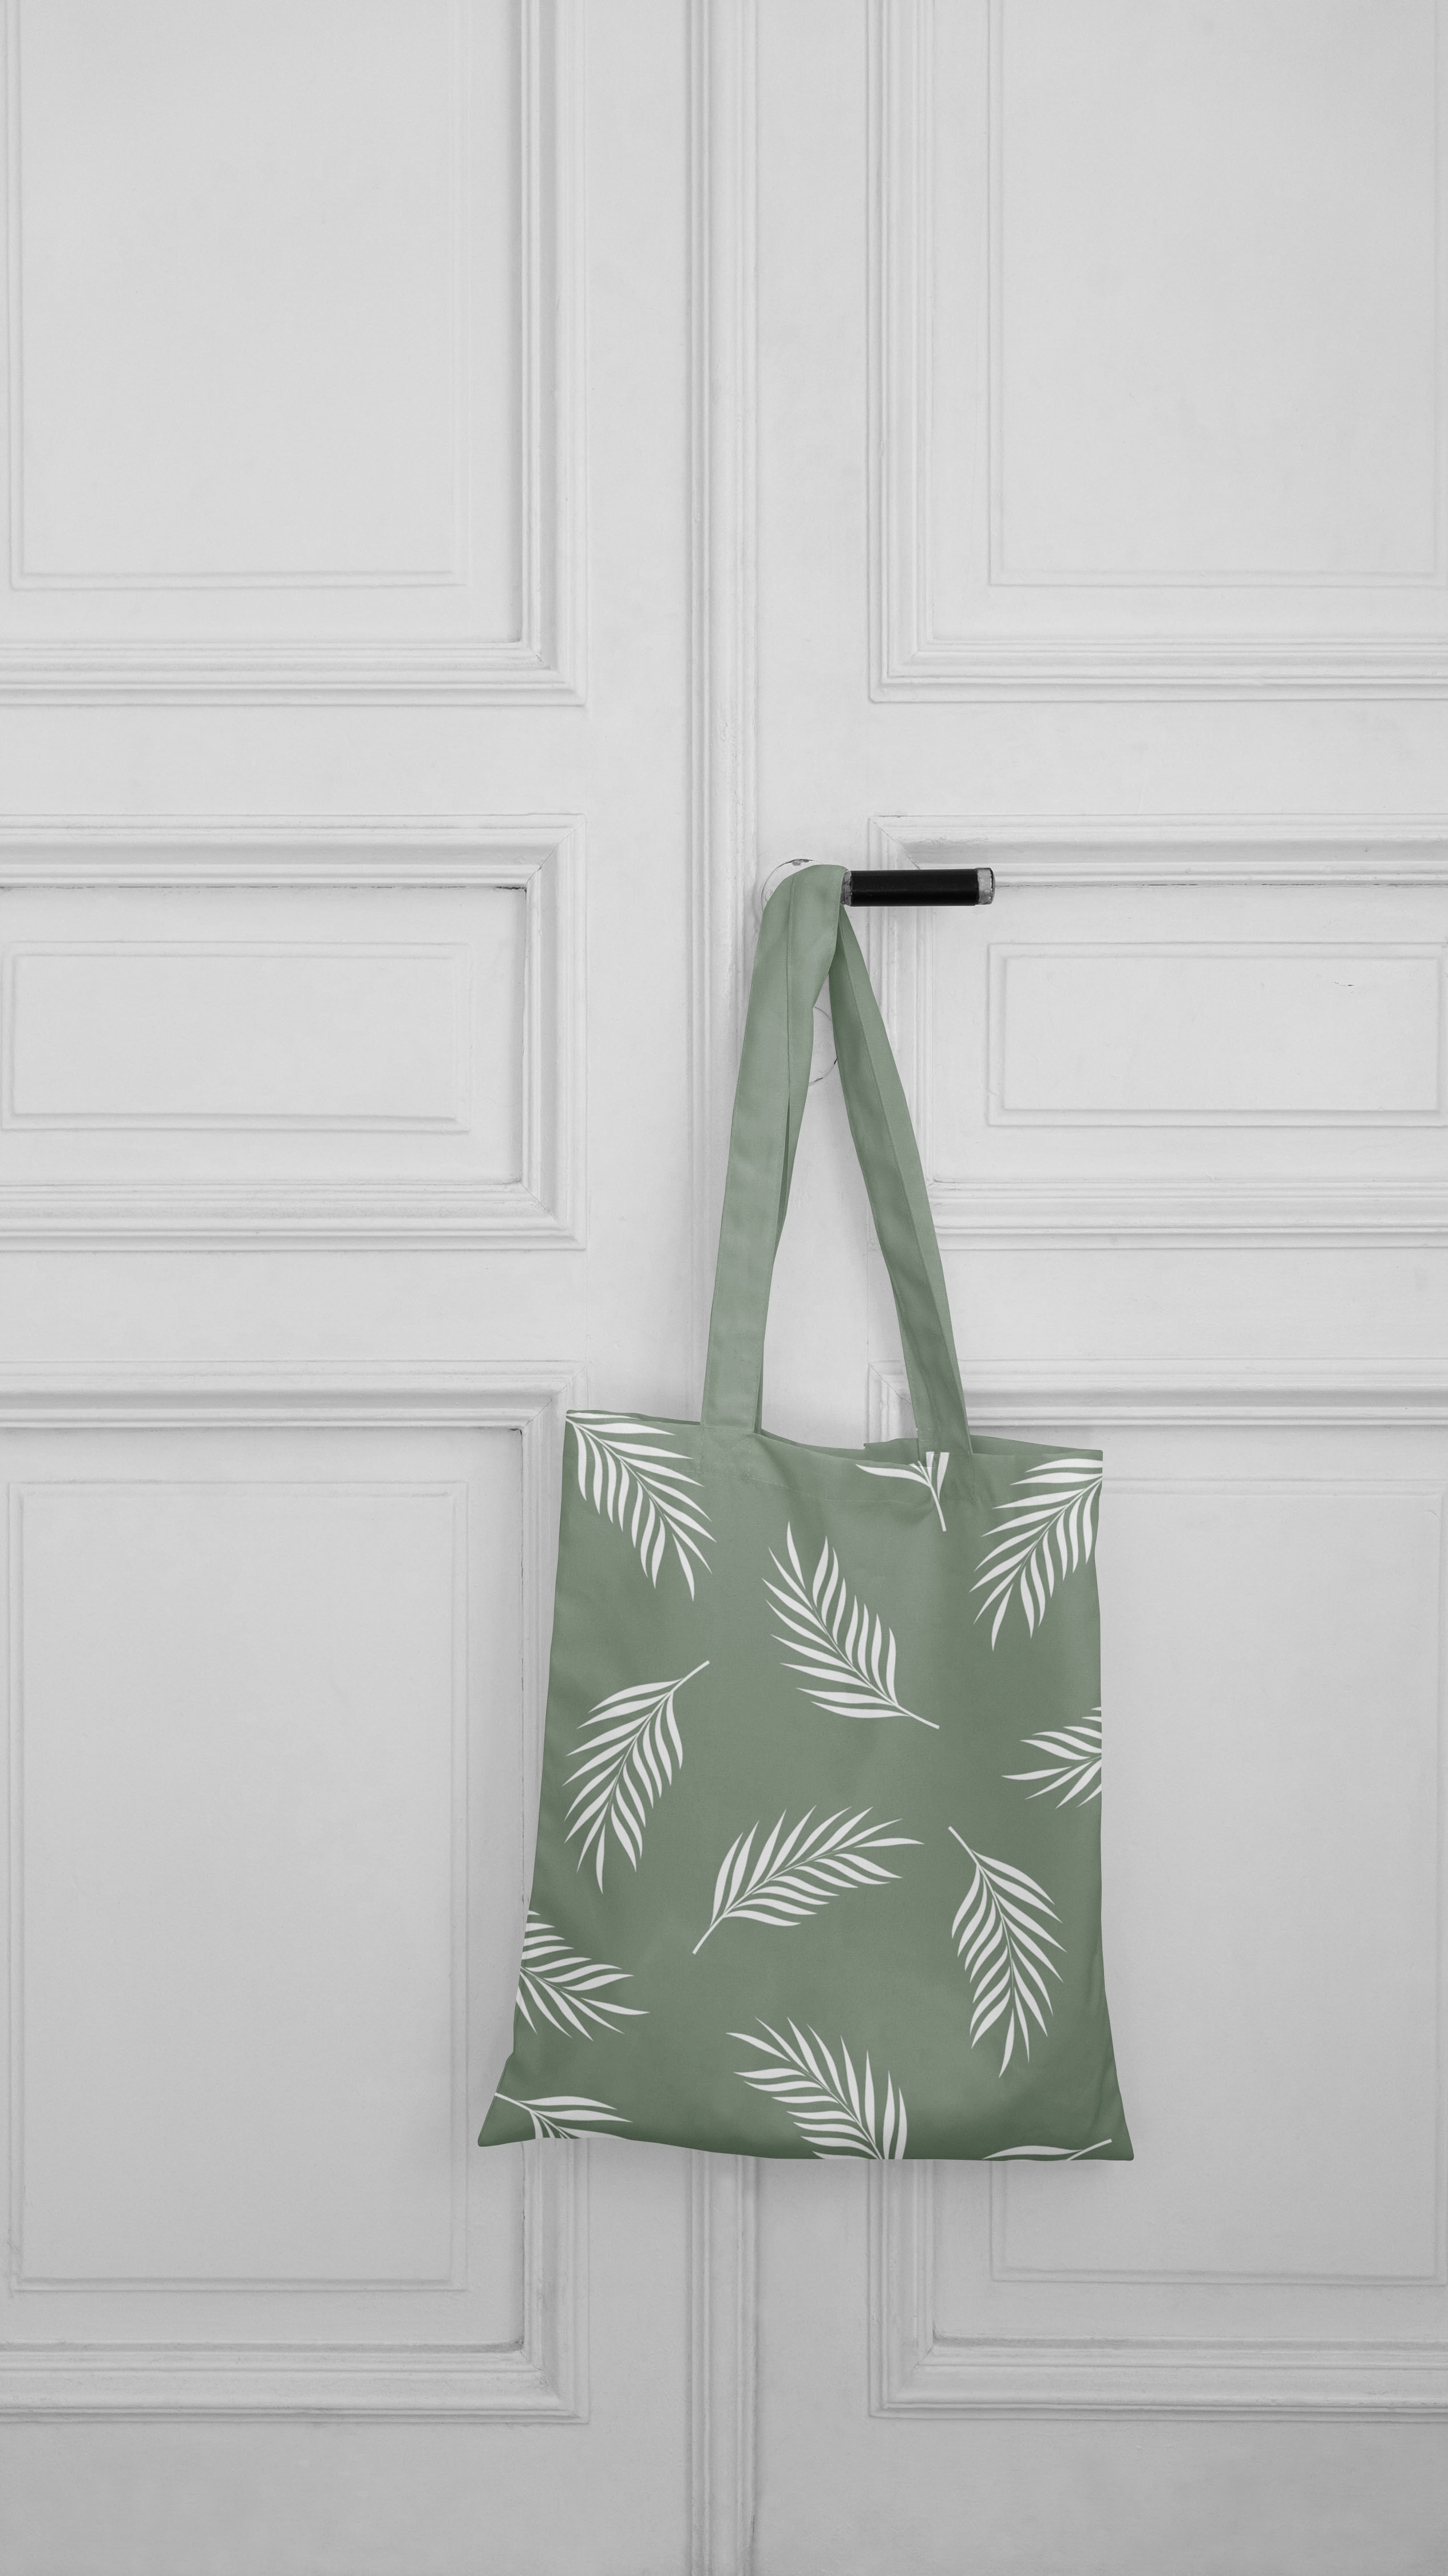 Green tote bag hanging on a white door.